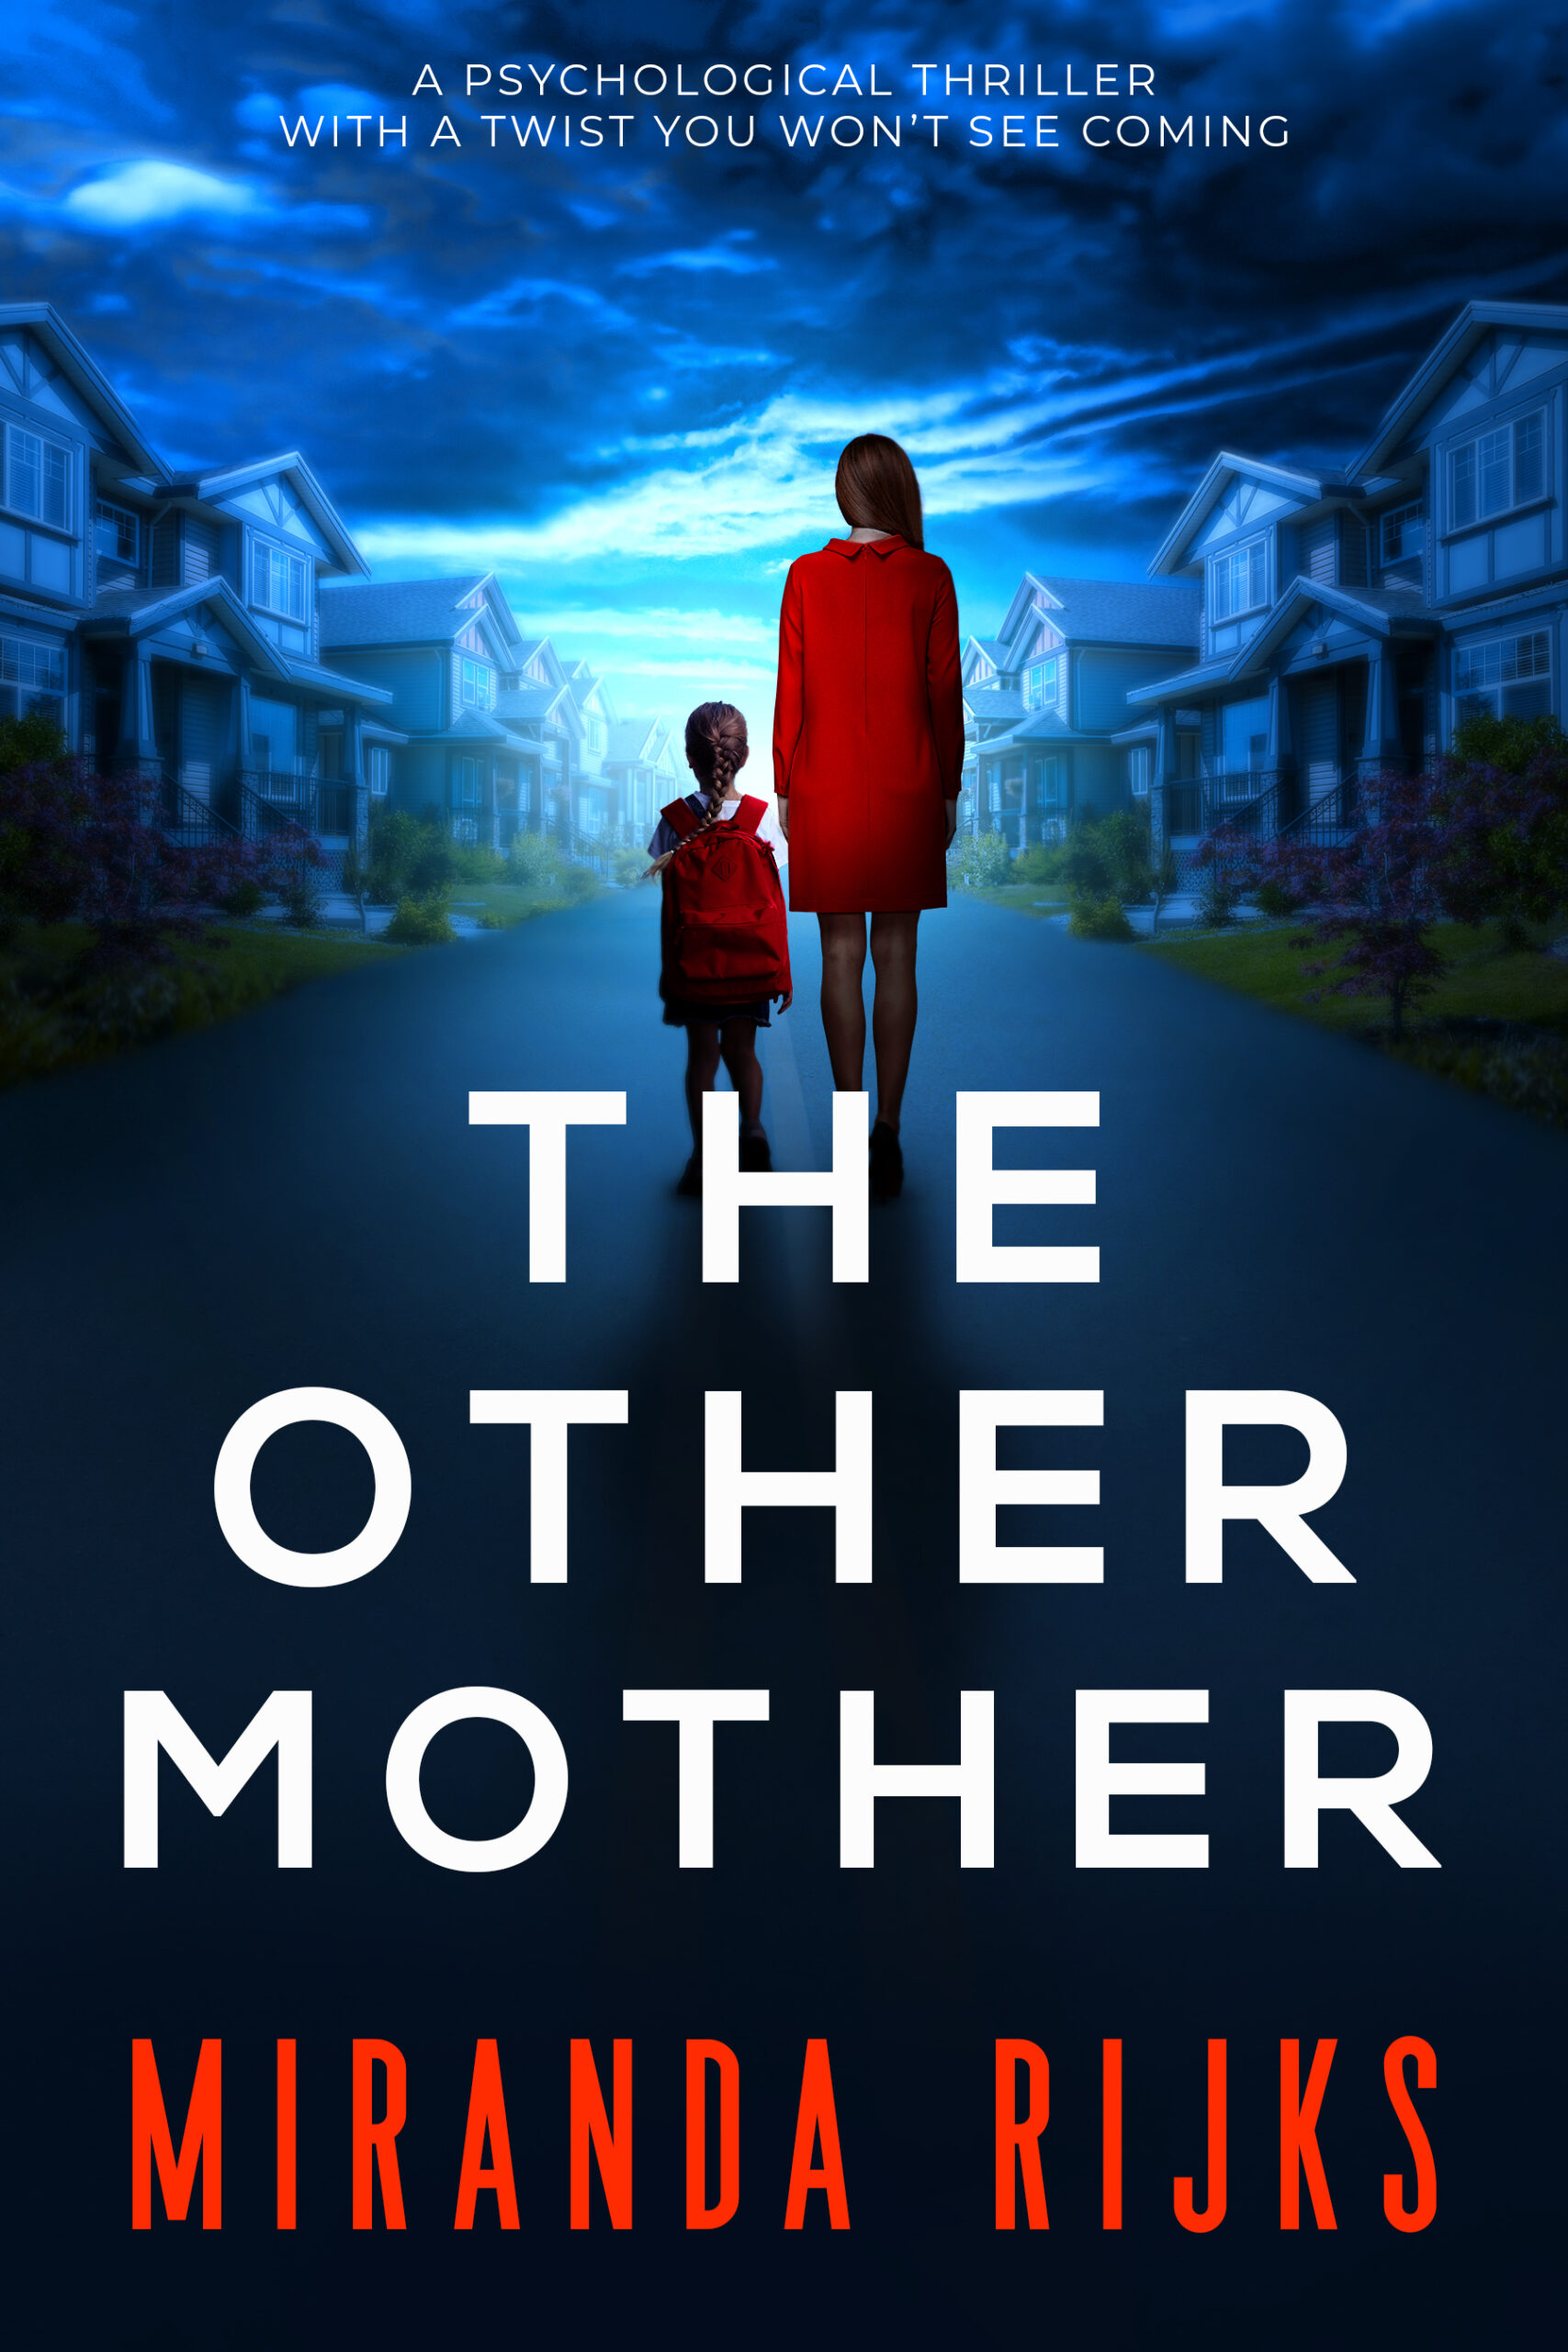 MIRANDA RIJKS NEW RELEASE – THE OTHER MOTHER